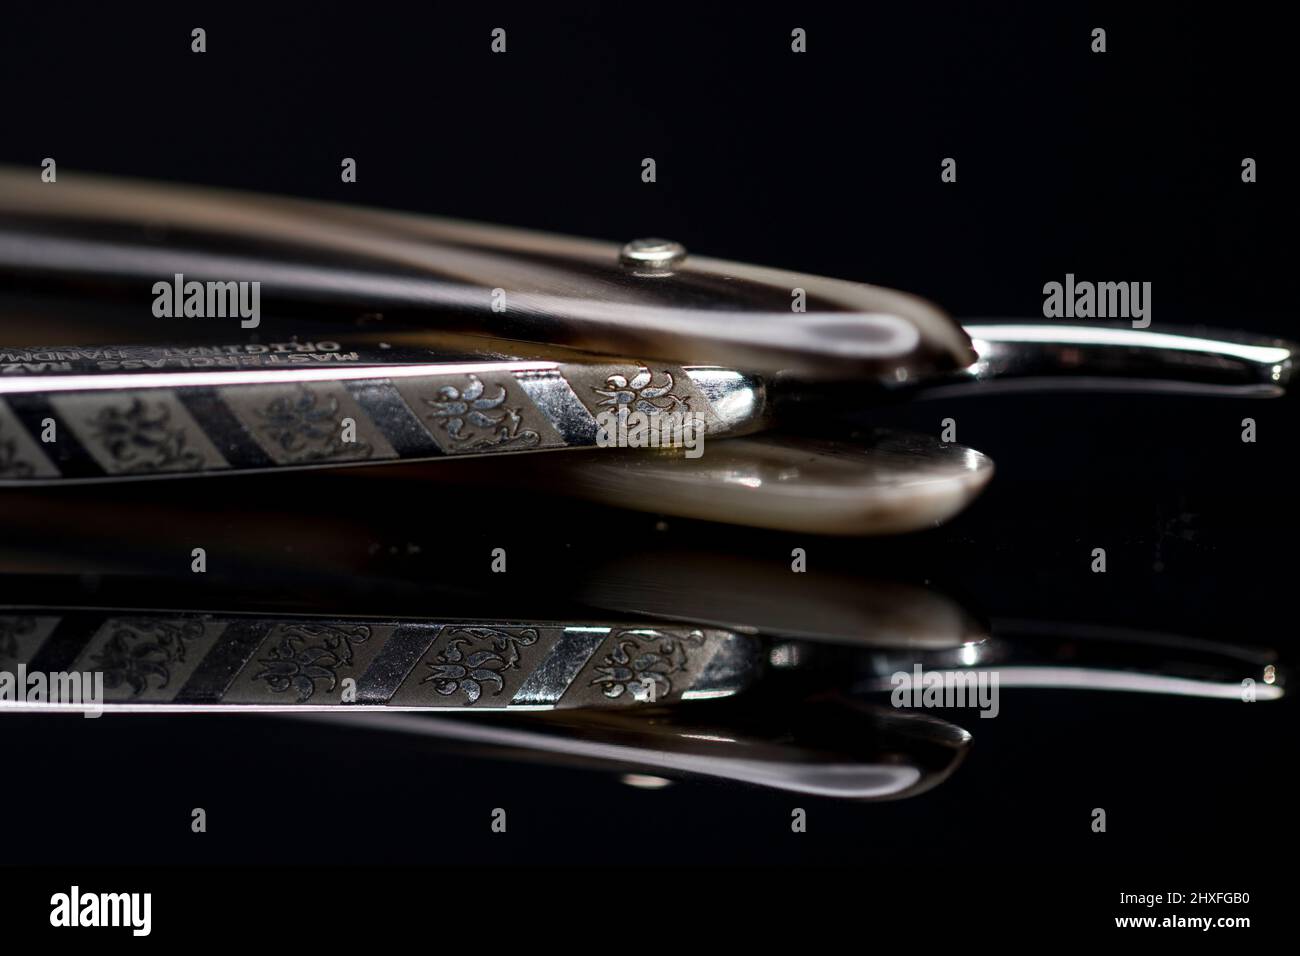 Straight razor spine detail cut throat razor and scales close up. Stock Photo